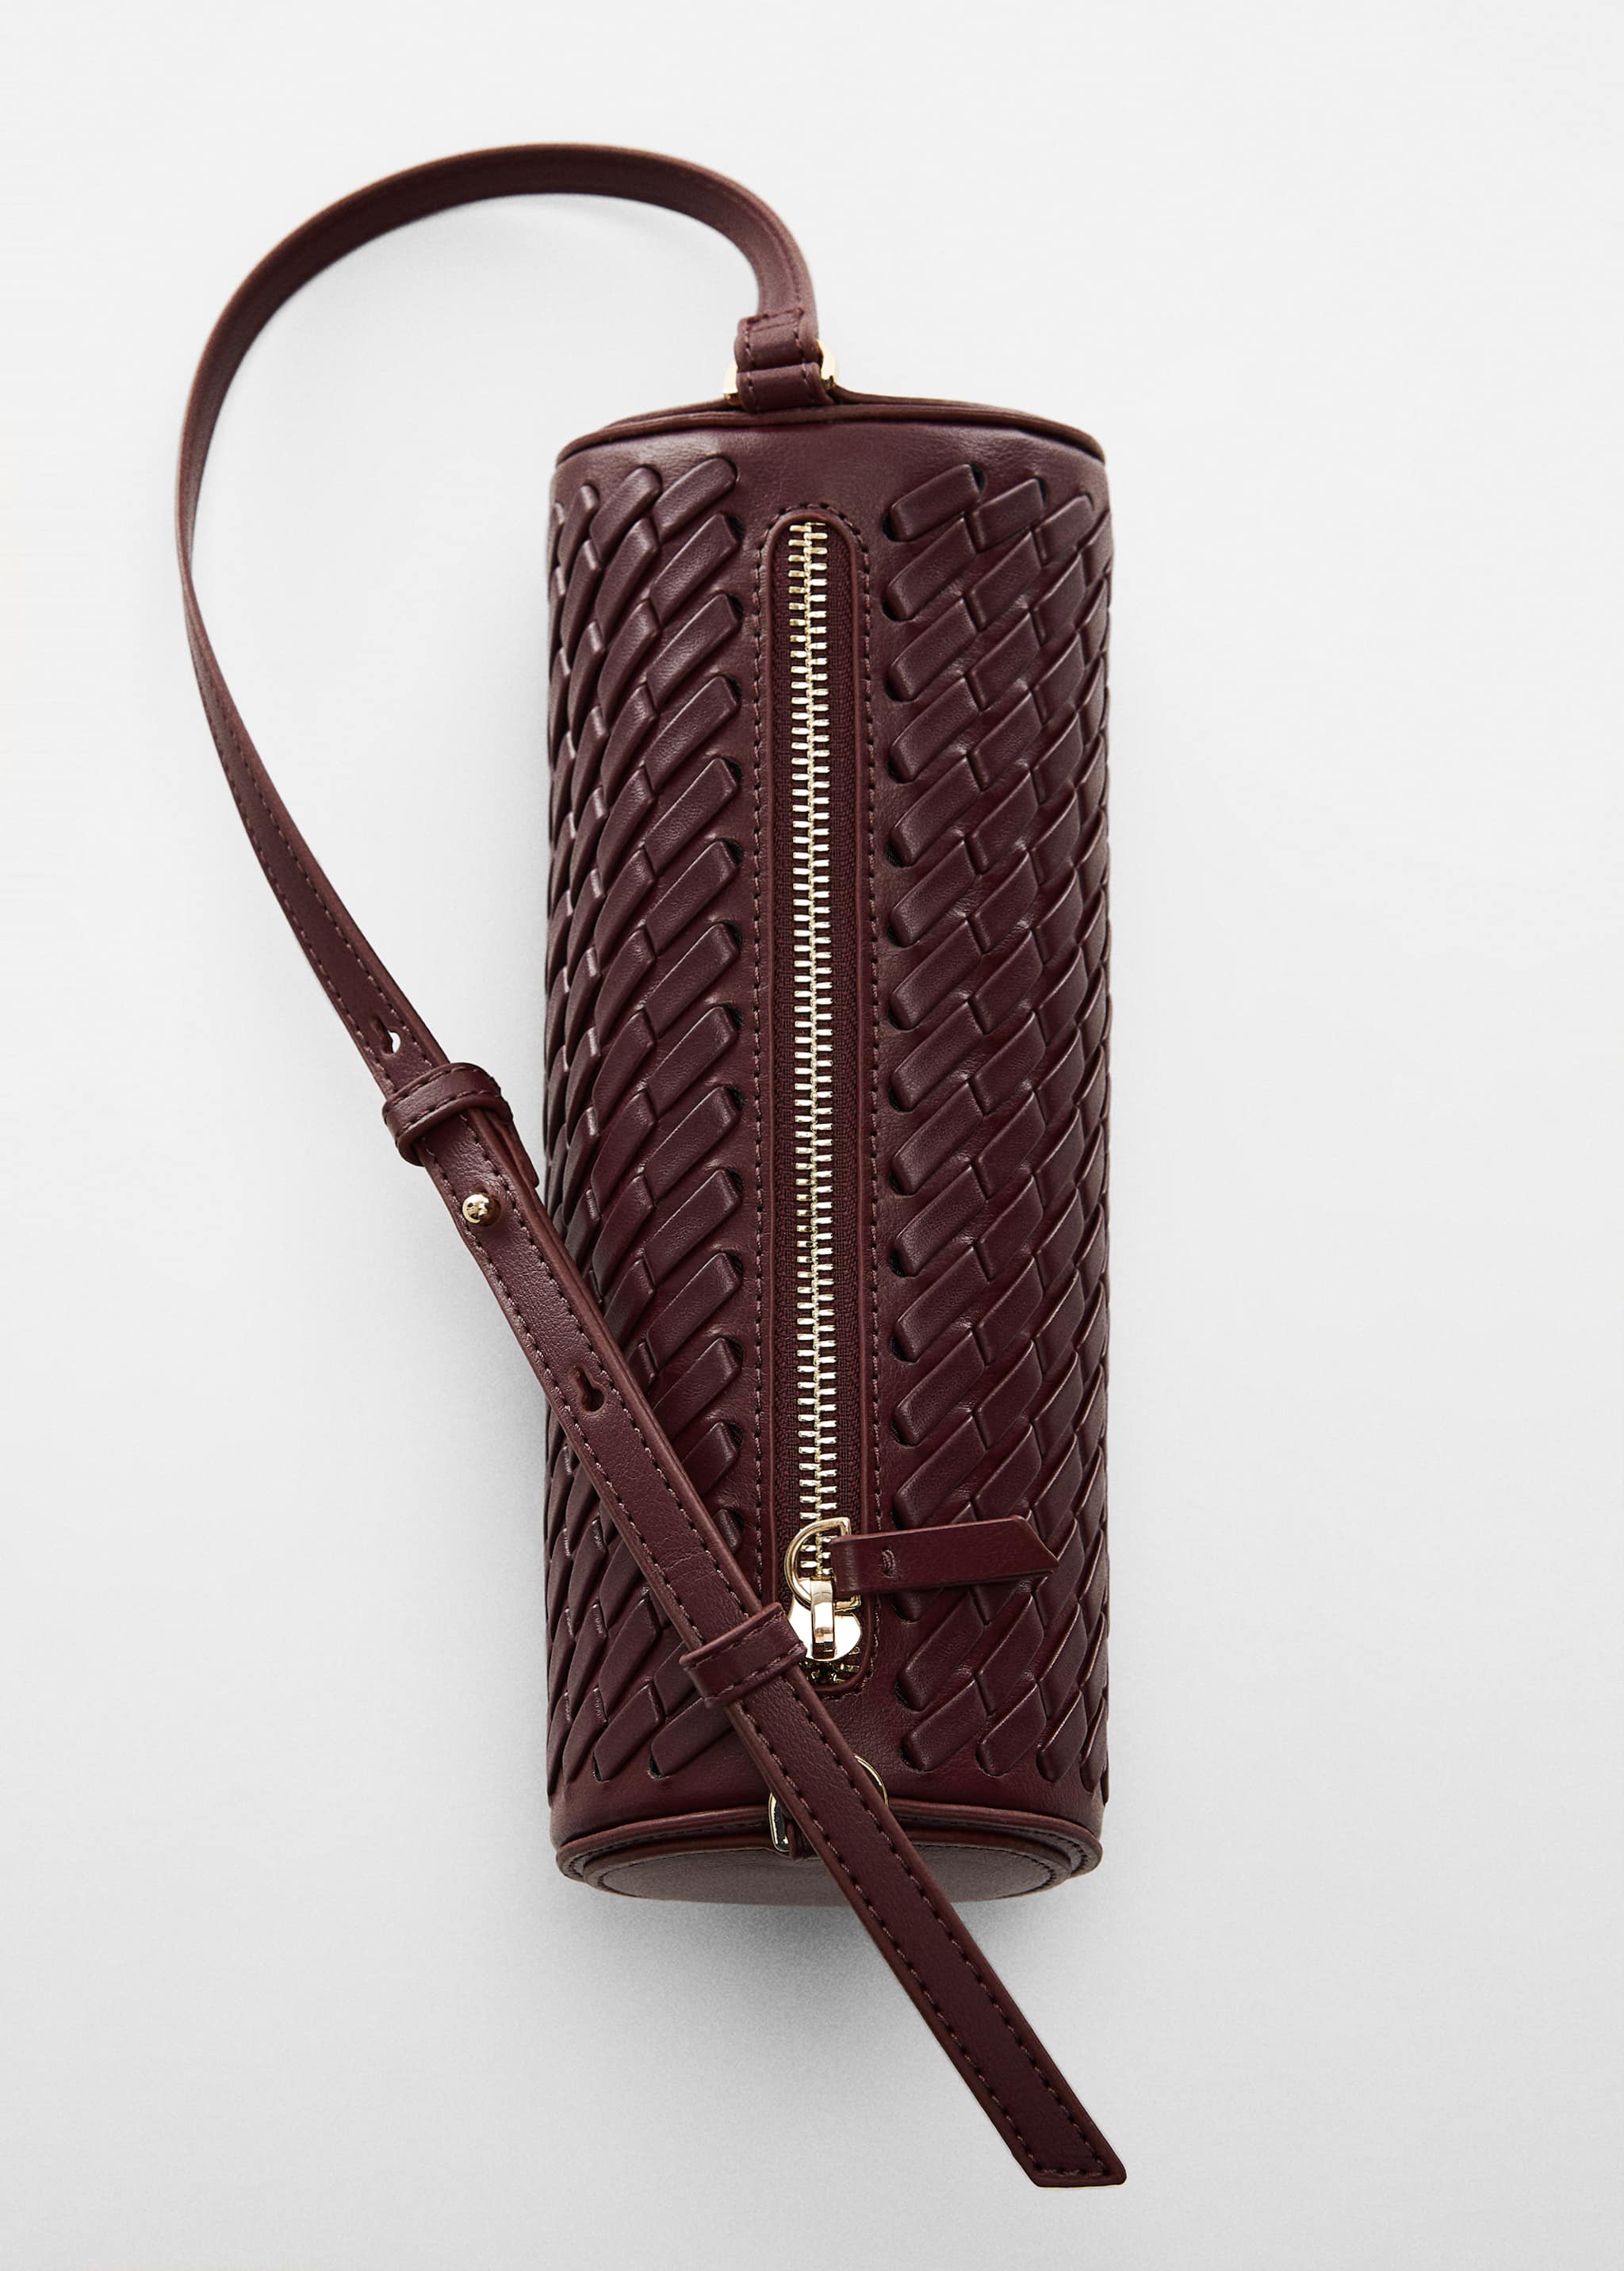 Braided cylindrical bag - Details of the article 5